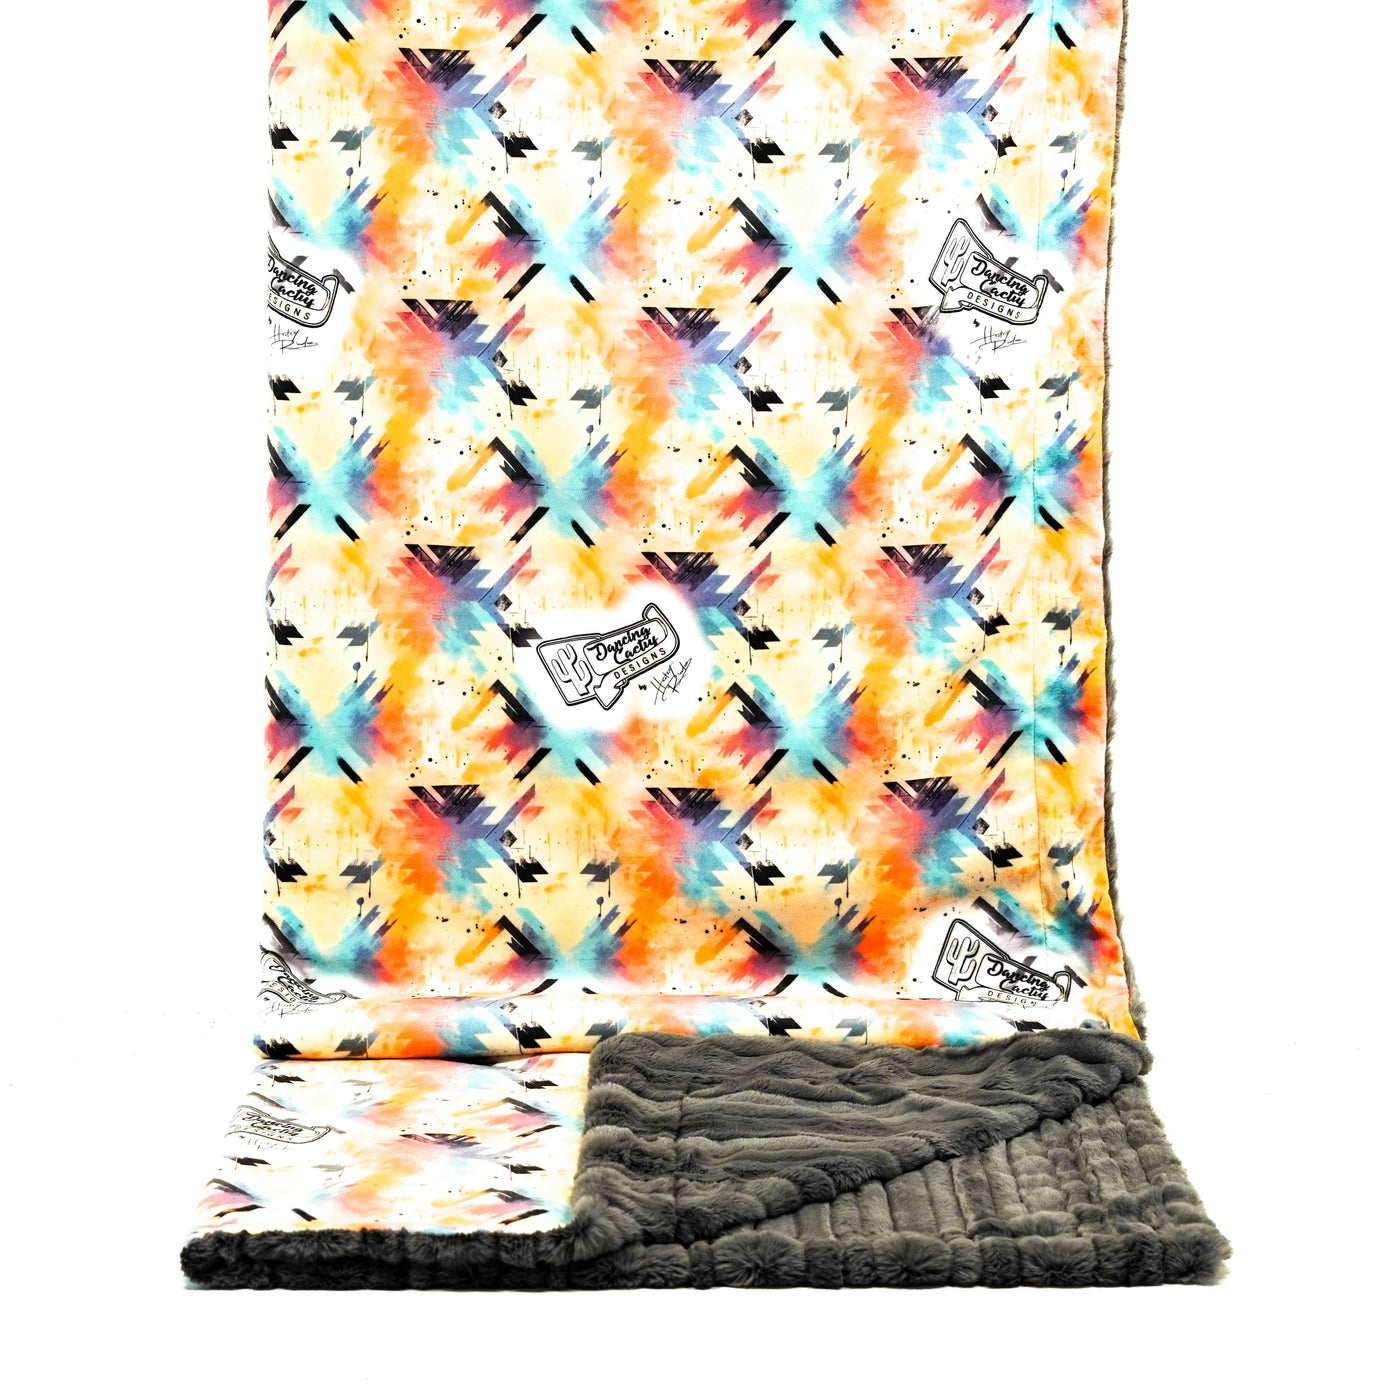 Adult Sized Minky Blanket - Graphite Vienna w/ Watercolor Splash-Adult Sized Minky Blanket-Western-Cowhide-Bags-Handmade-Products-Gifts-Dancing Cactus Designs